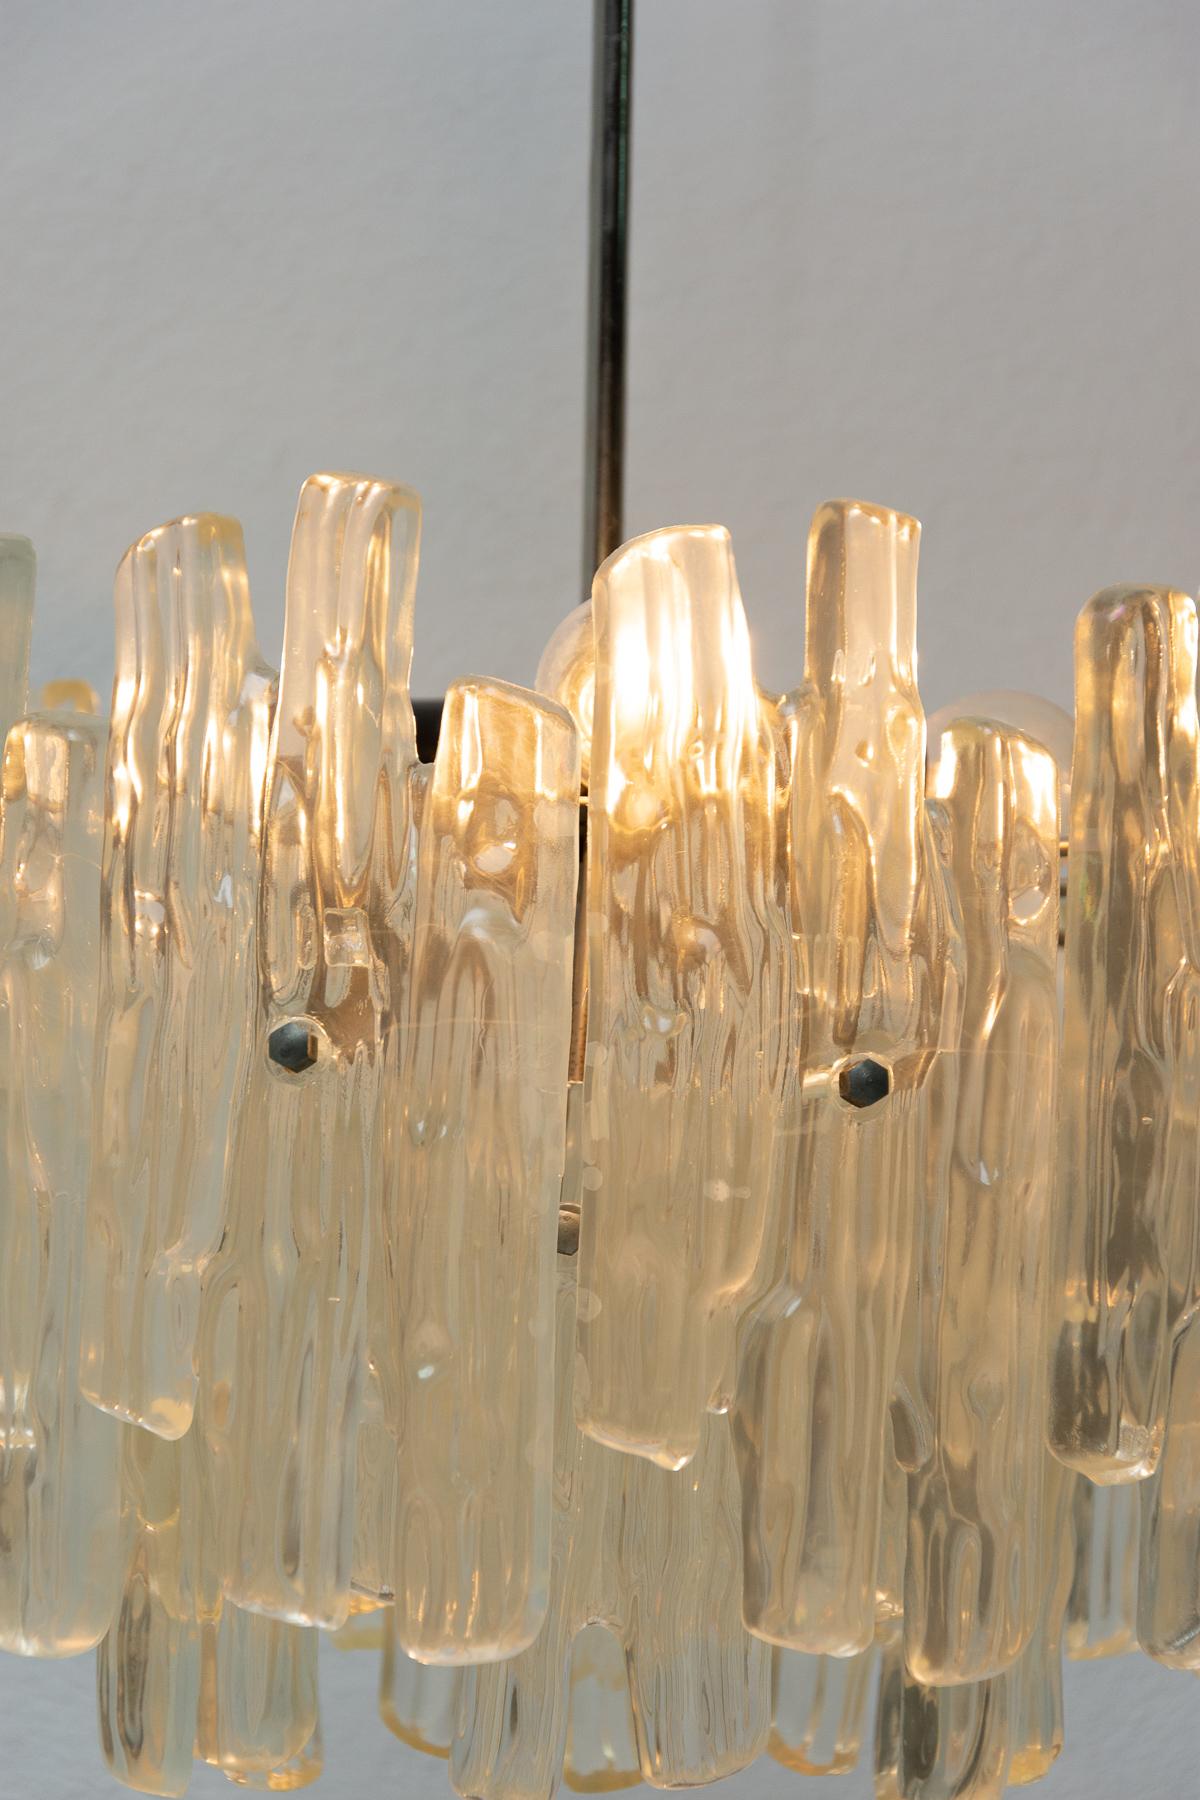 Midcentury Austrian chandelier probably designed by Julius Theodore Kalmar and made in the 1960s in Austria. This spectacular chandelier features imitation of icicle-like glass components that make up the shade. It features three light bulbs E14.